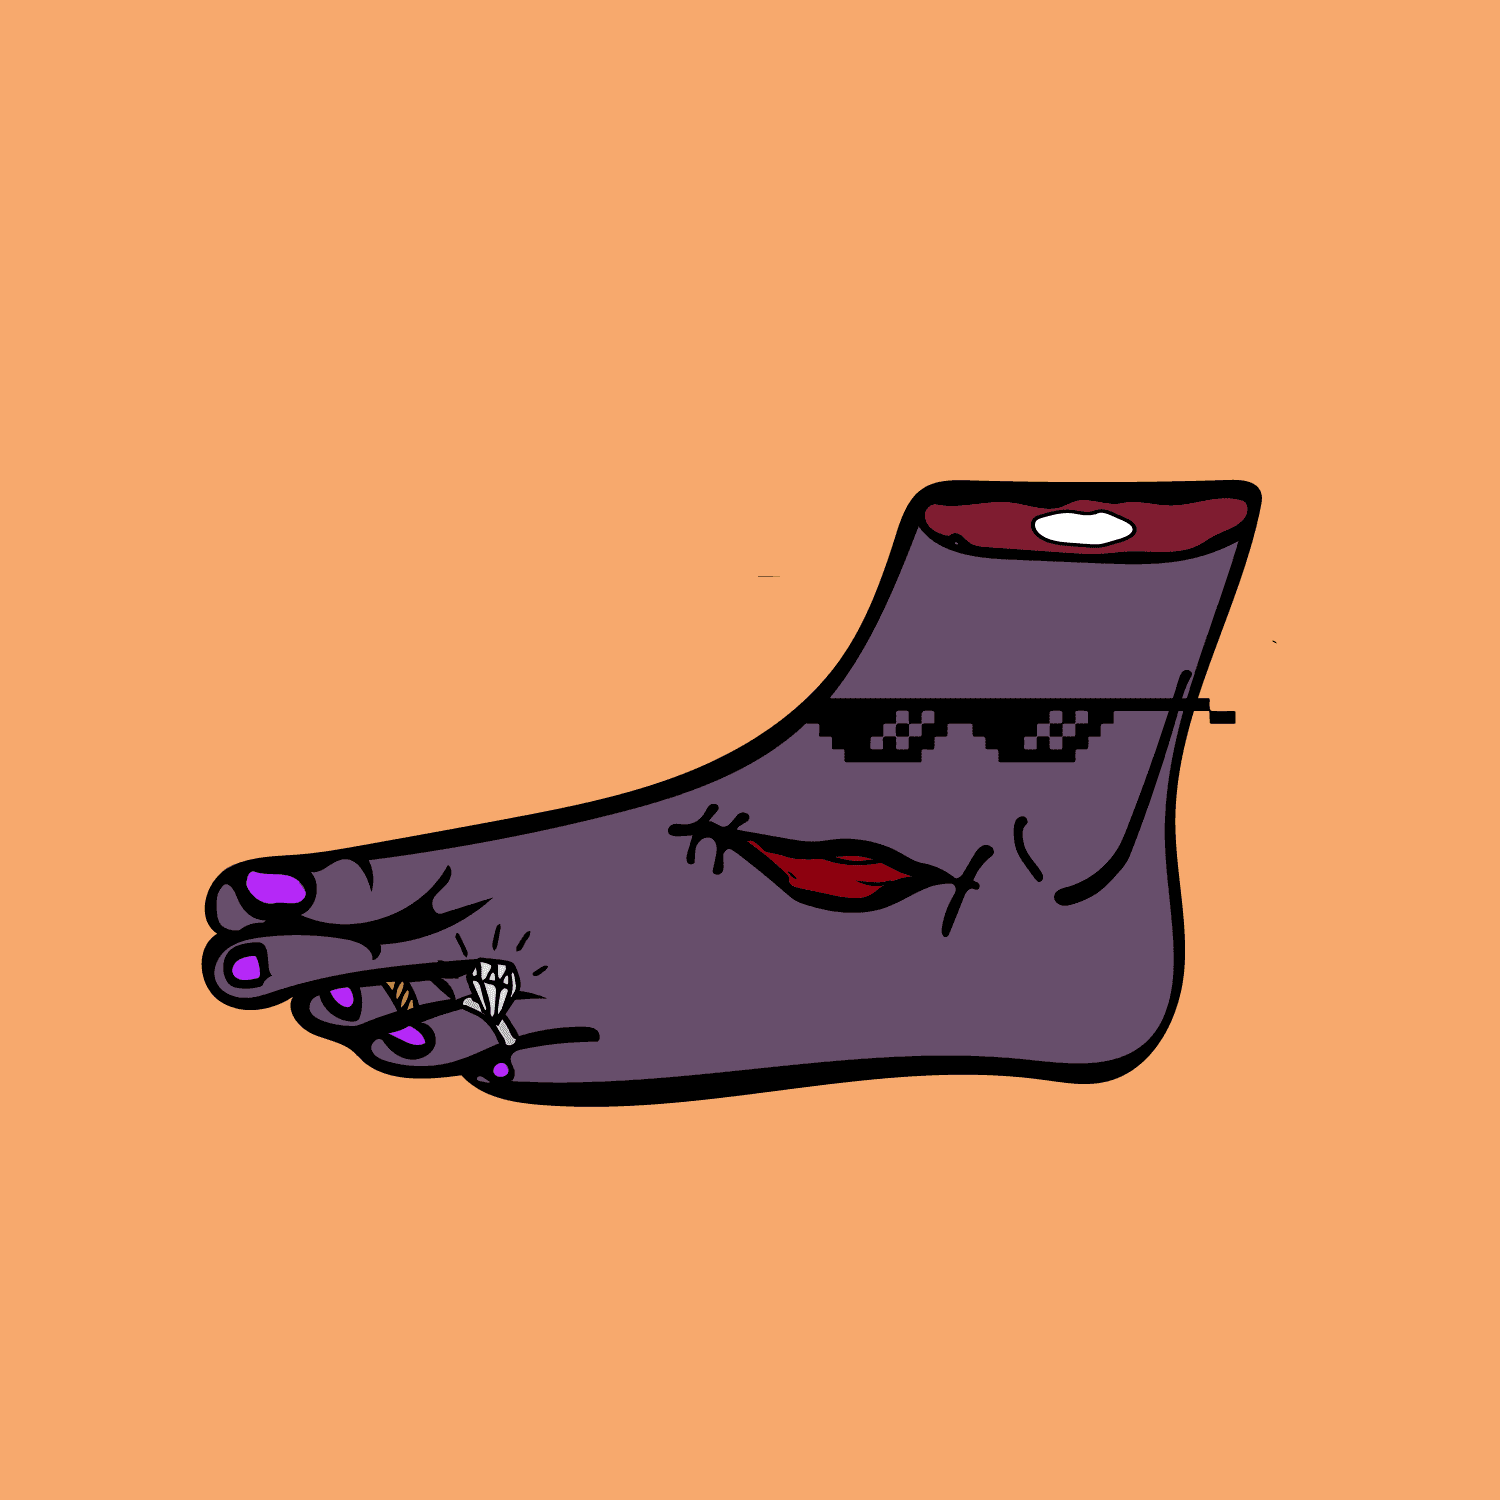 ZombieFeet #10